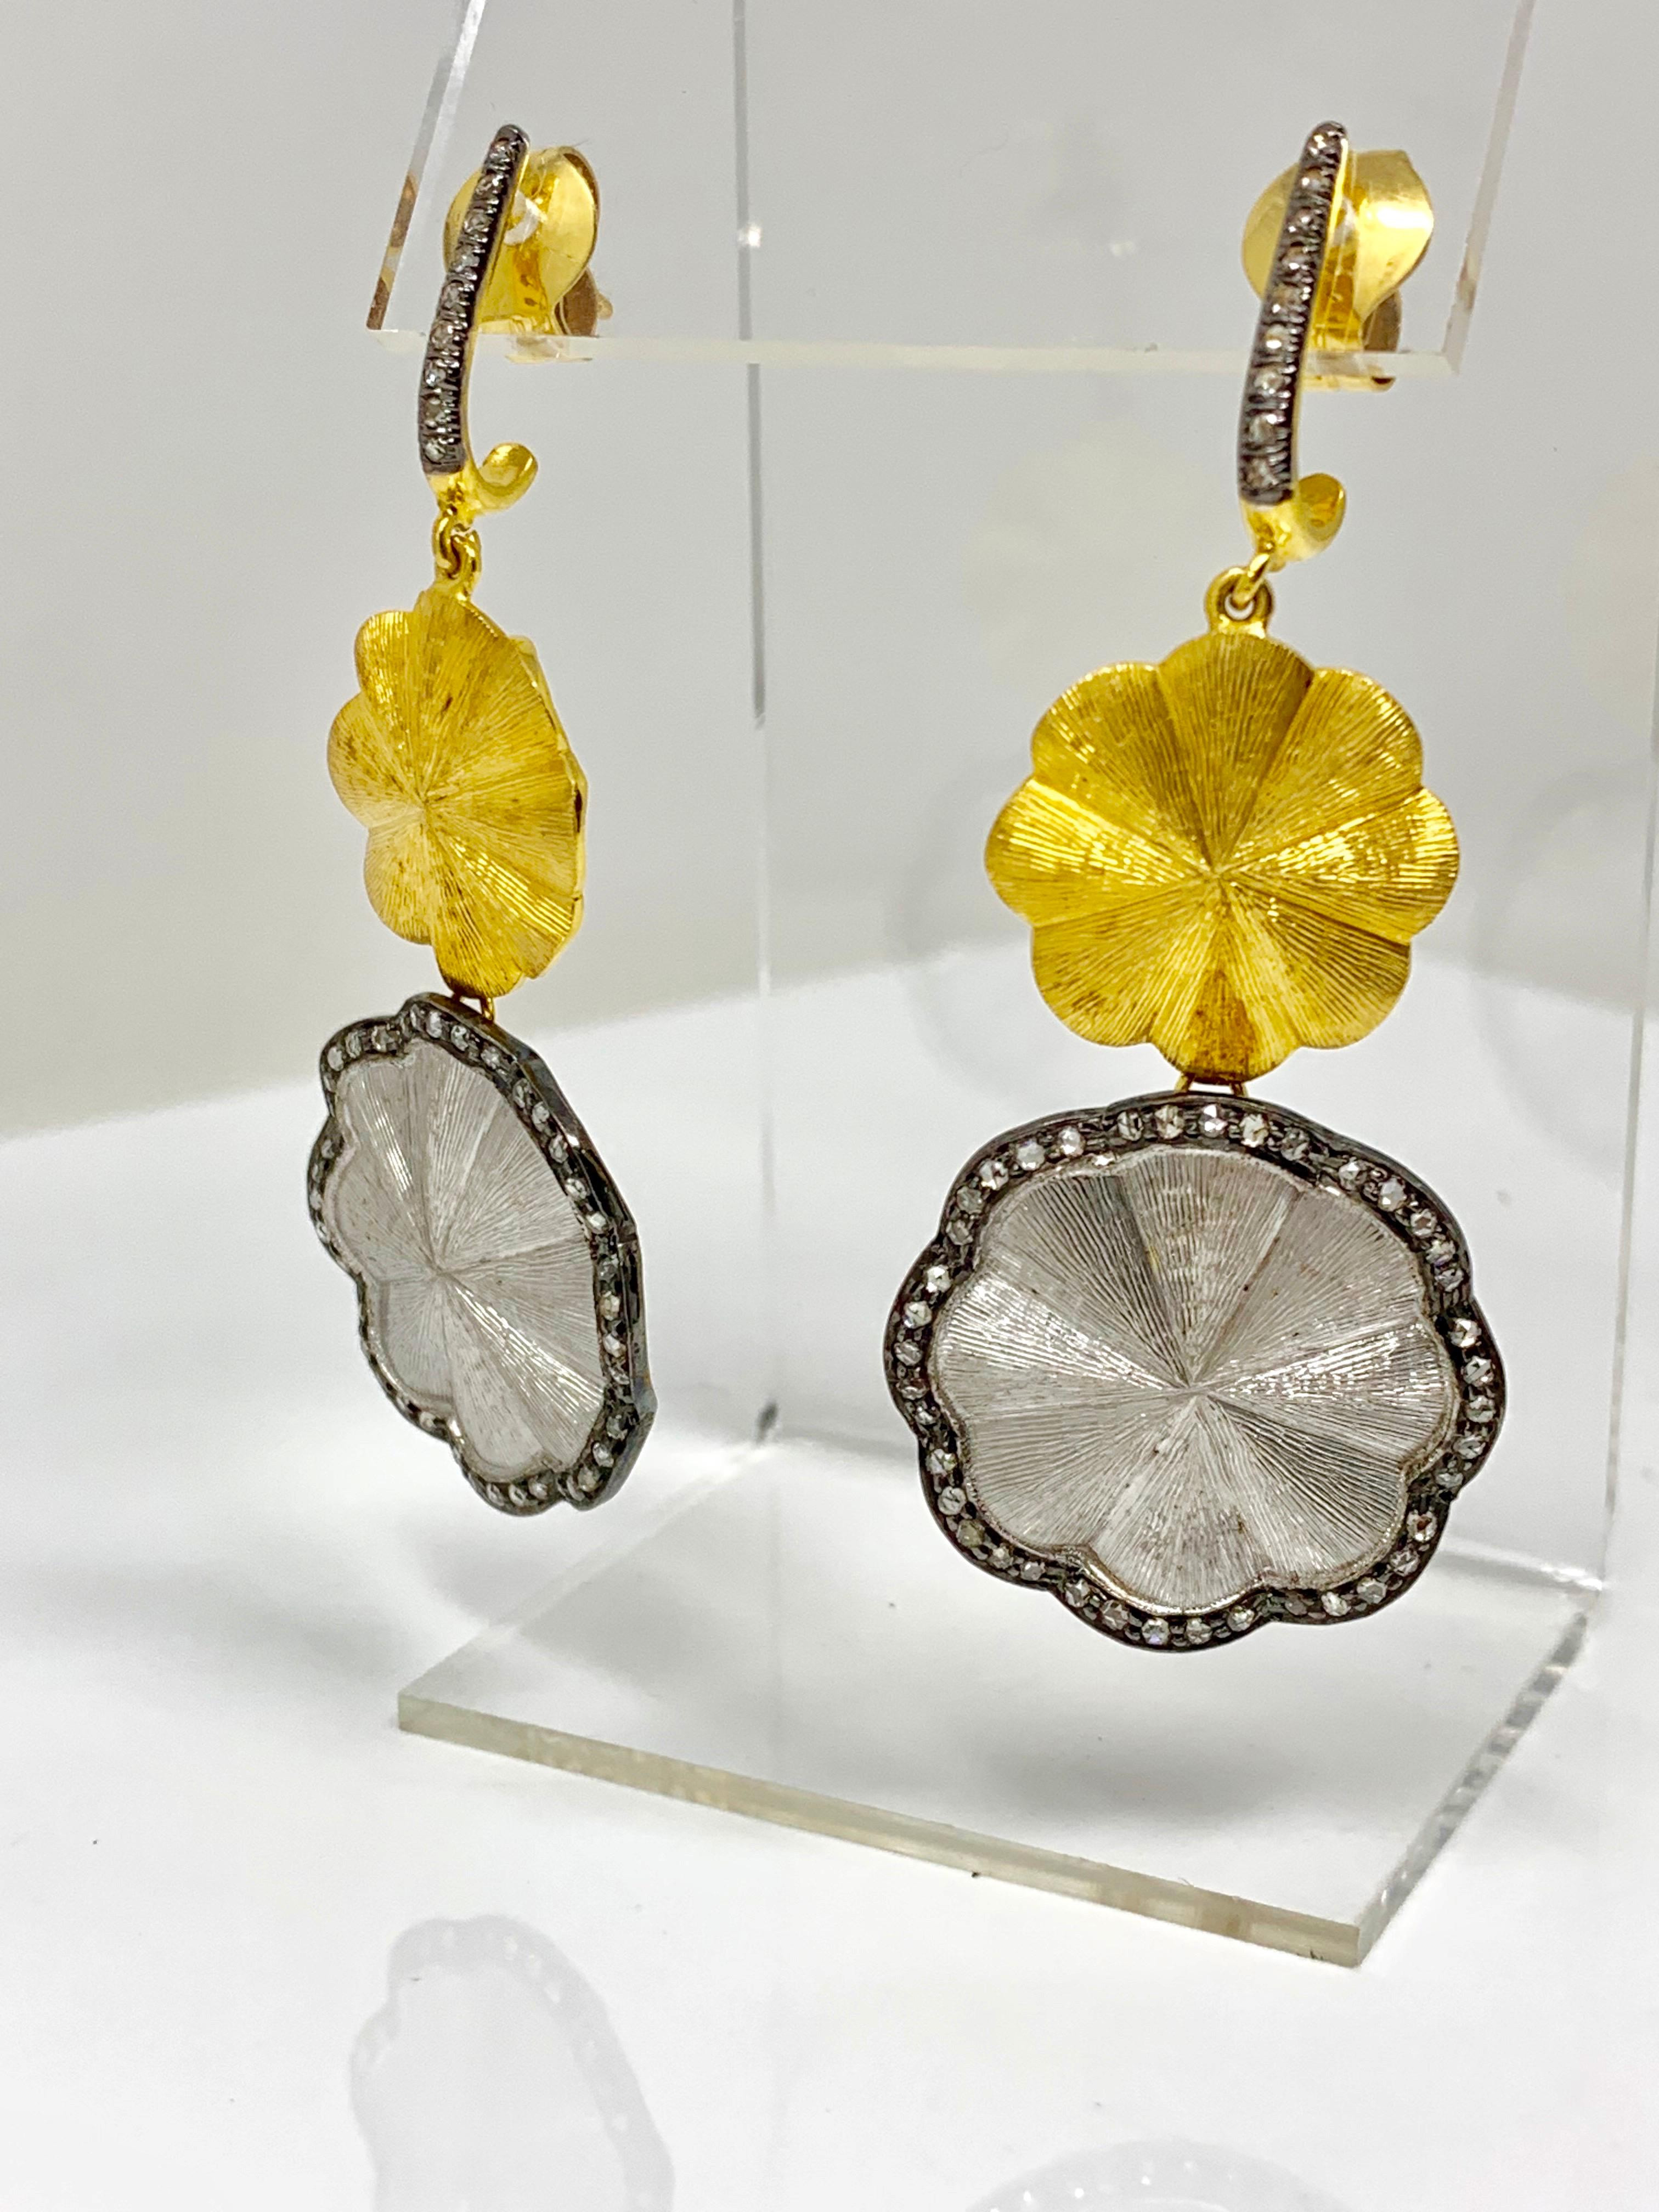 White Rose Cut Diamond Chandelier Earrings in 18 Karat White and Yellow Gold For Sale 6